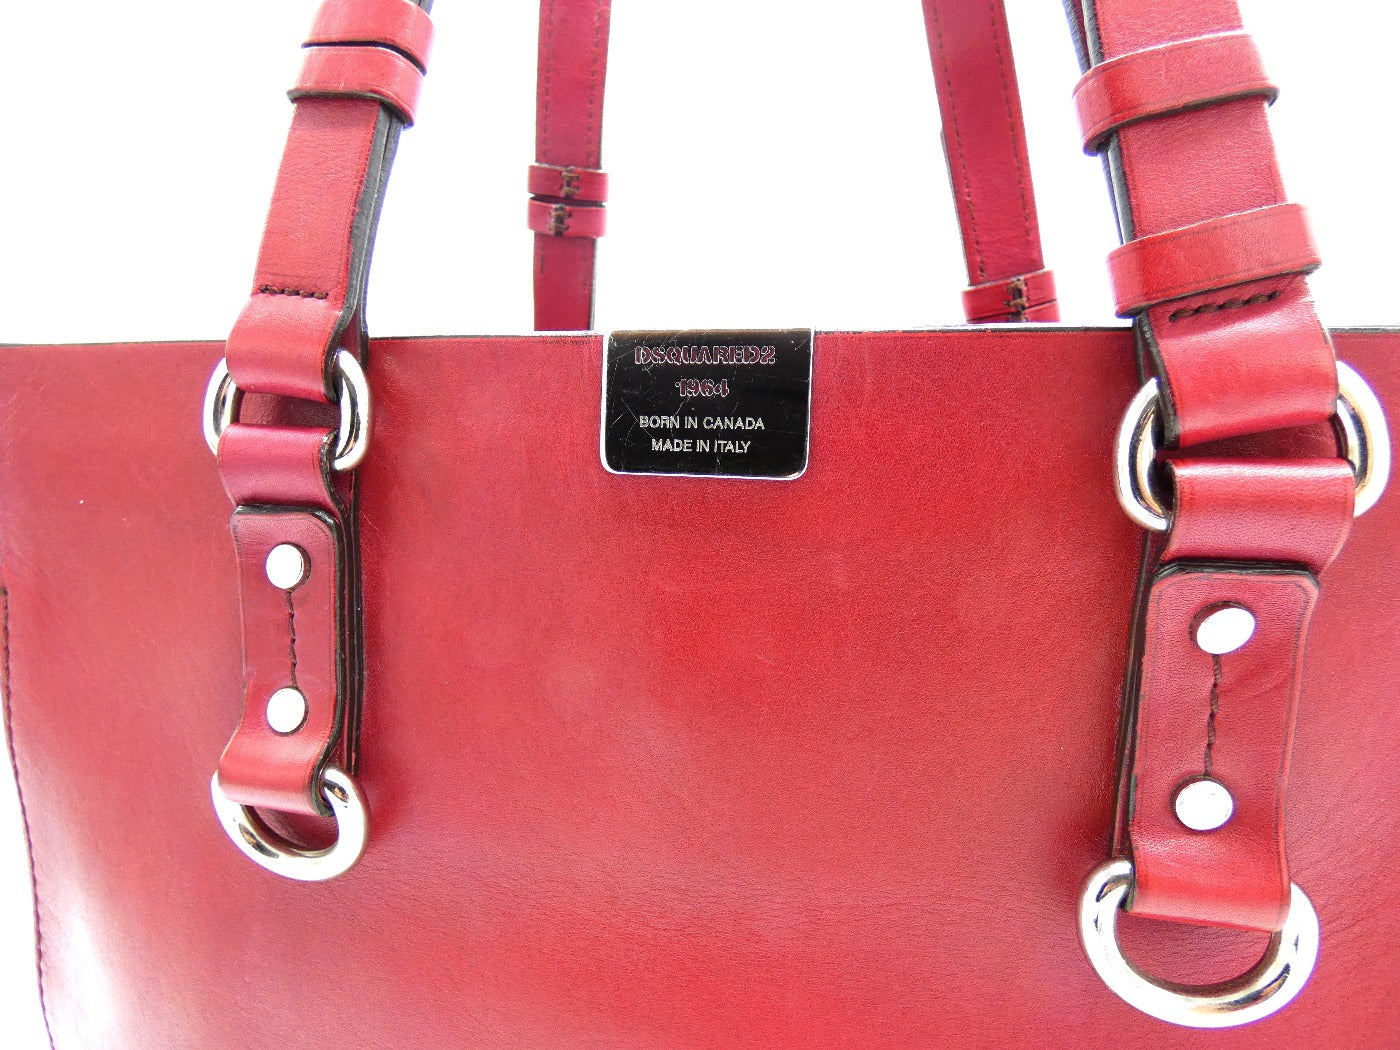 DSquared2 Red Leather Large Tote Bag DSquared2